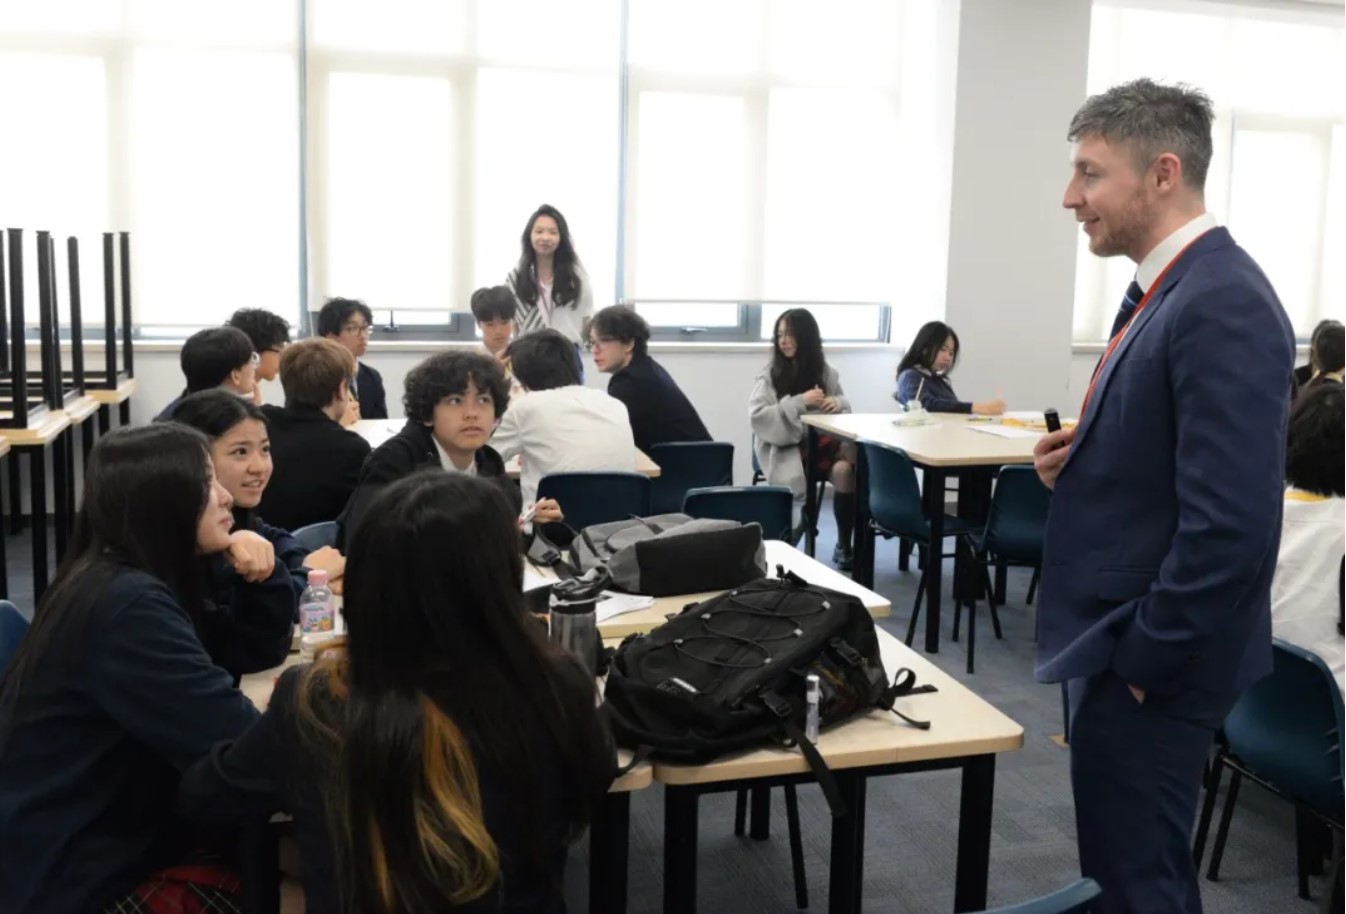 Mr Paterson held a discussion with Year 11 students regarding IB courses.